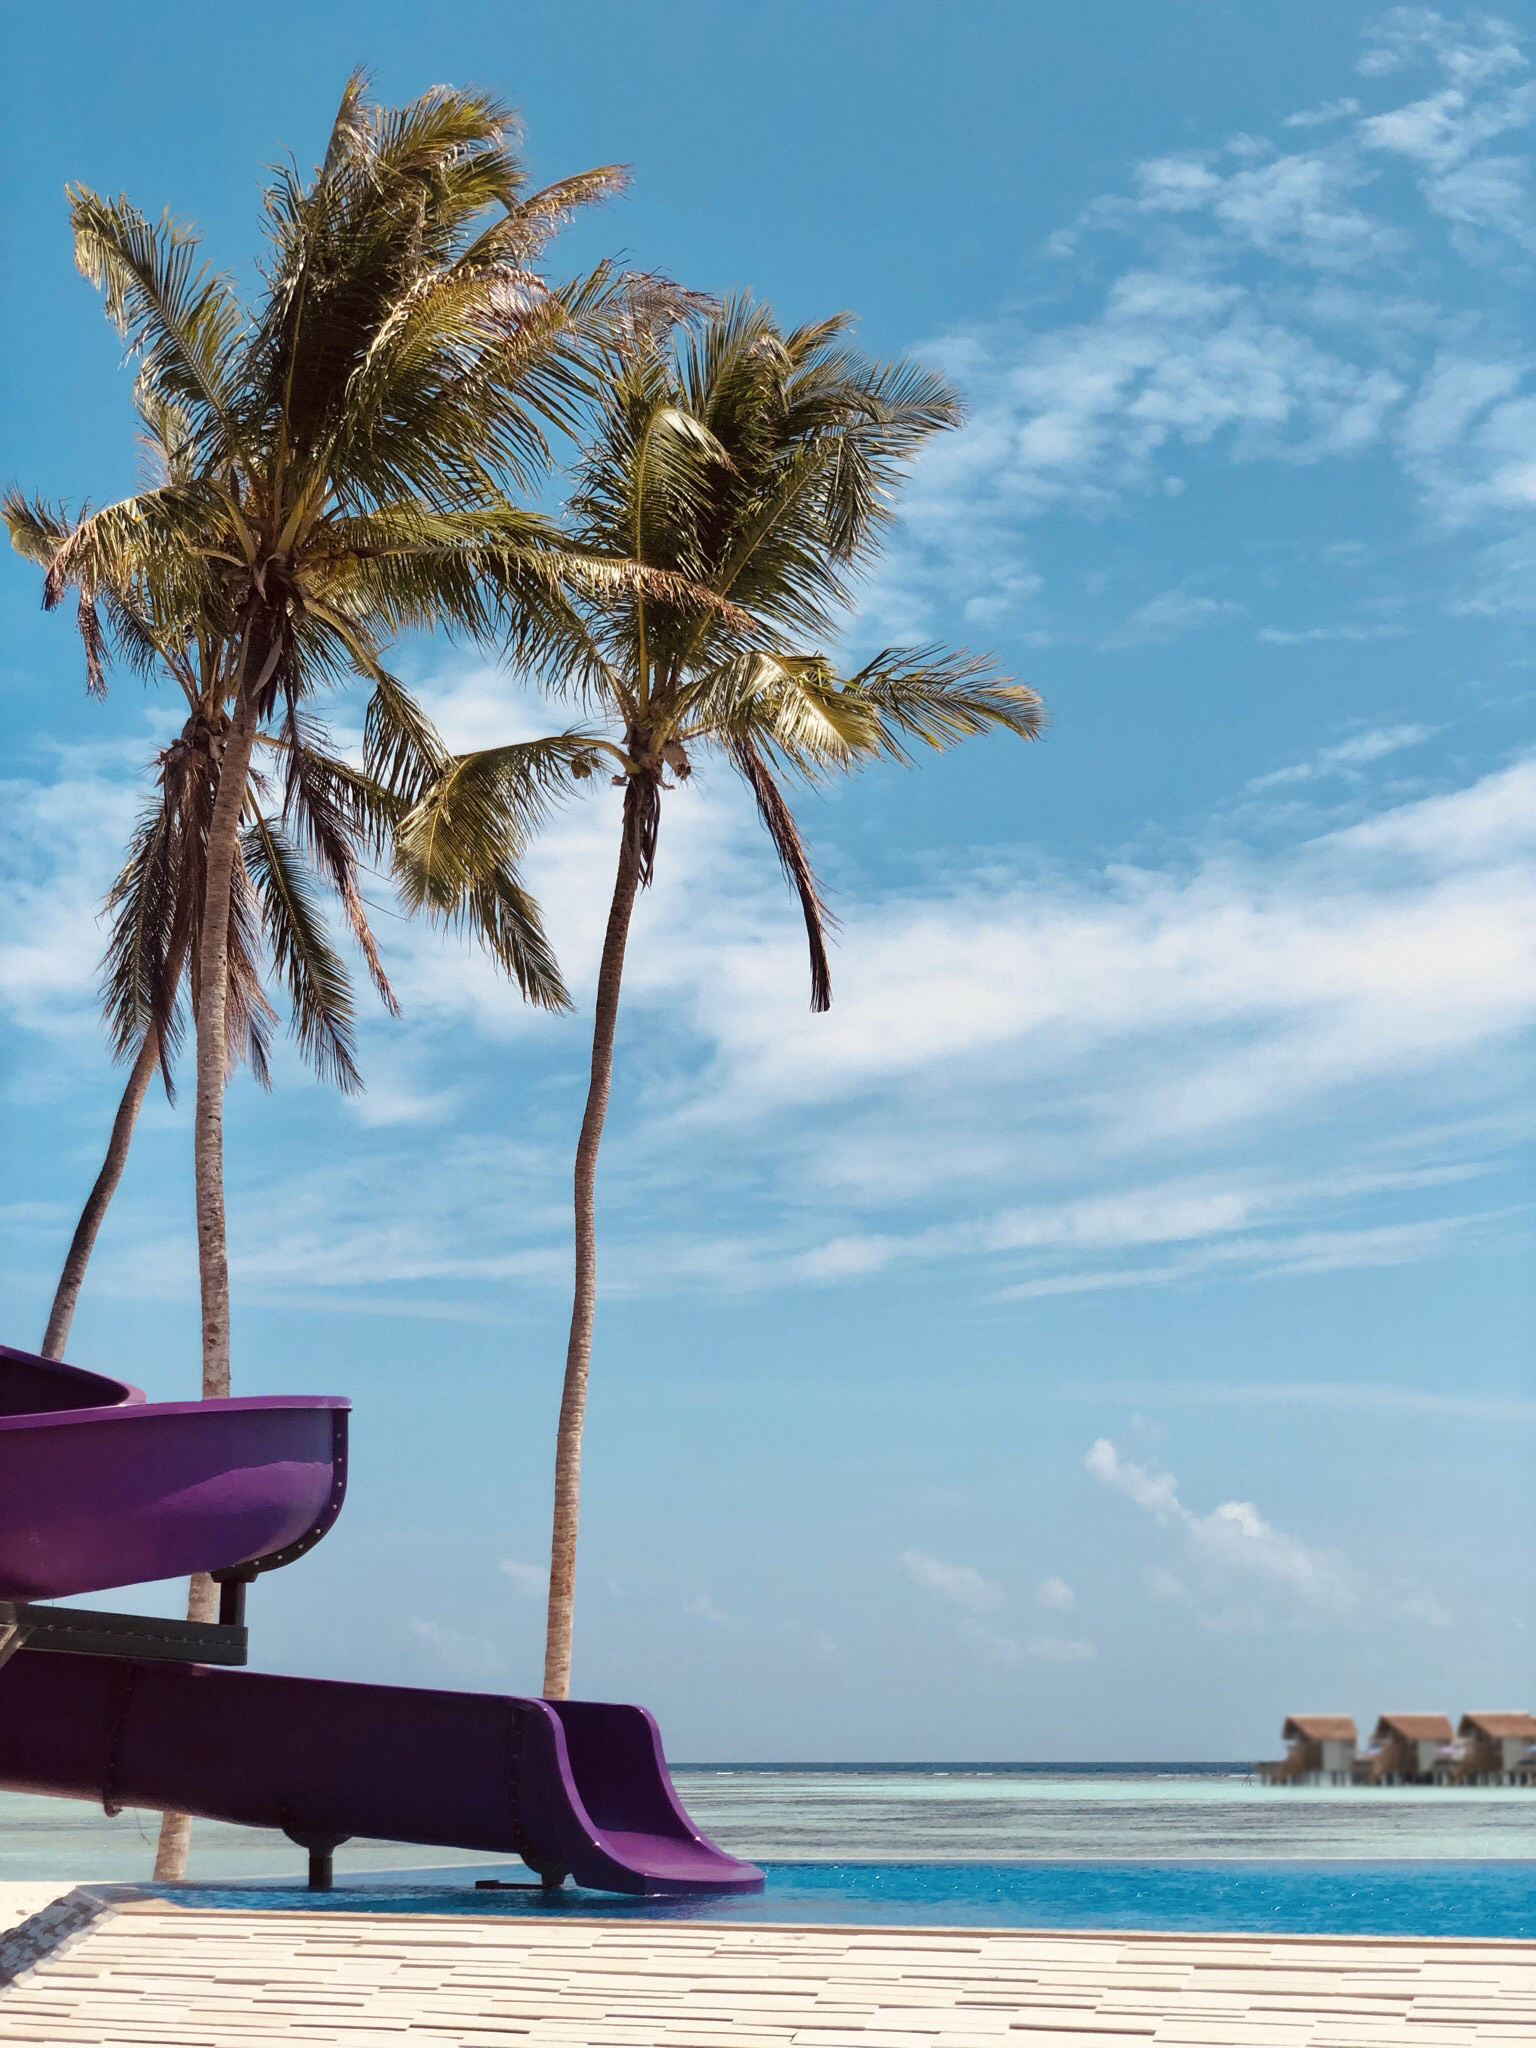 Hard Rock Hotel finally opens in the Maldives at the heart of Emboodhoo Lagoon - Alvinology